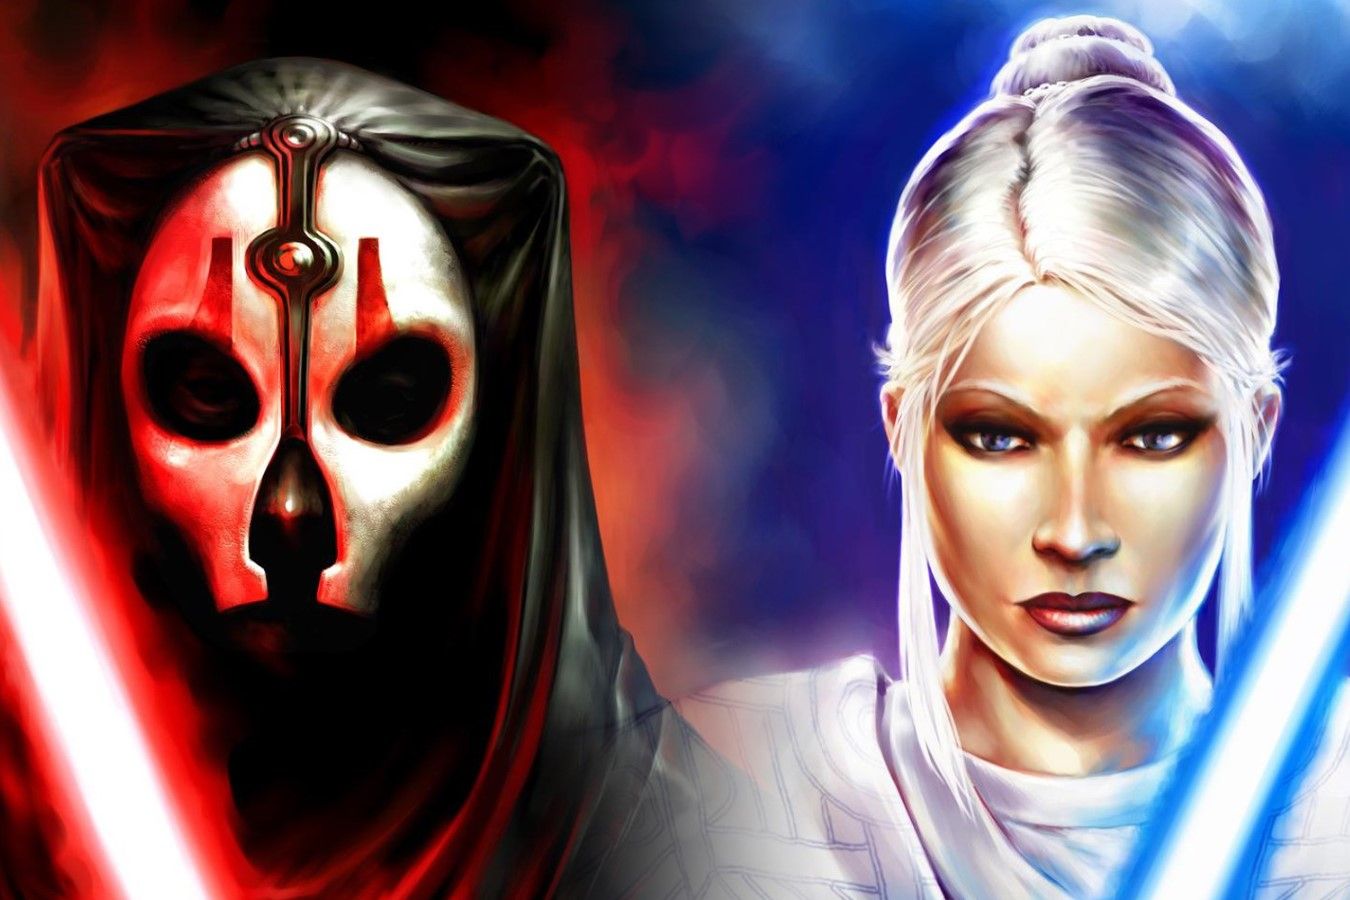 Star wars knights of the old republic русификатор steam фото 51